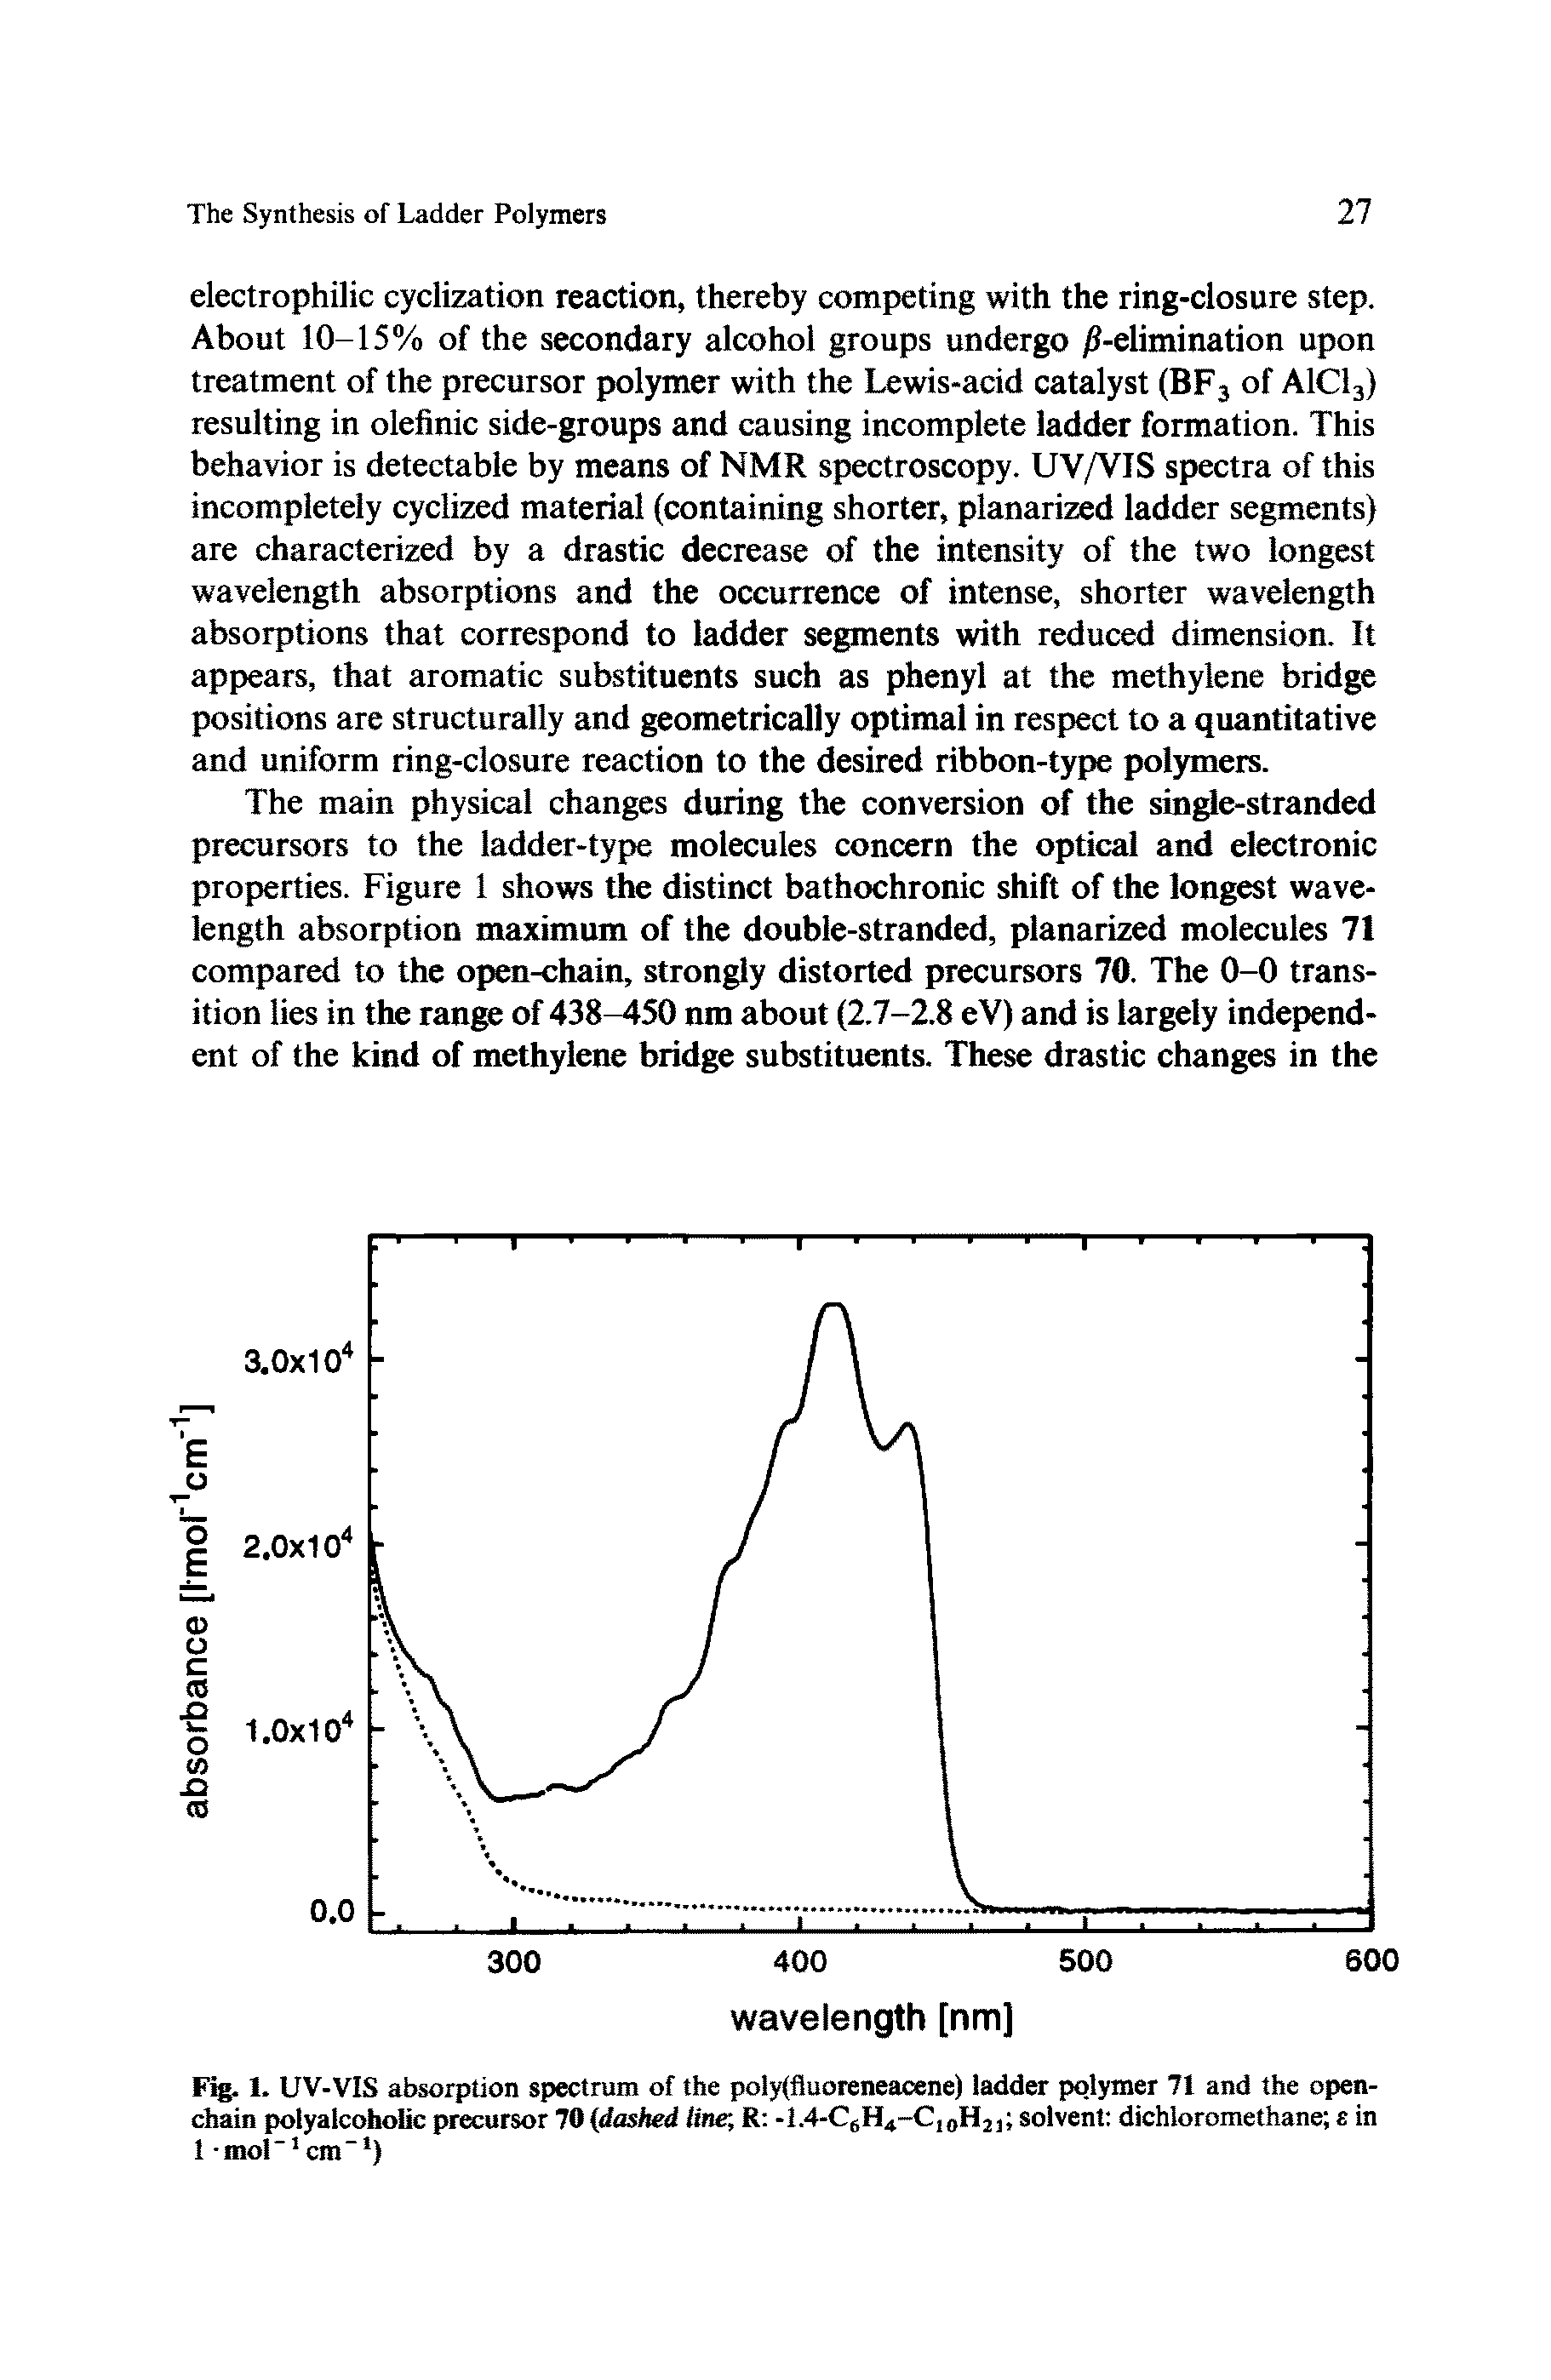 Fig. 1. UV-VIS absorption spectrum of the poly(fluoreneacene) ladder polymer 71 and the open-chain polyalcoholic precursor 70 dashed line R -1.4-C6H4-C,oH2i solvent dichloromethane s in 1 -moL cm )...